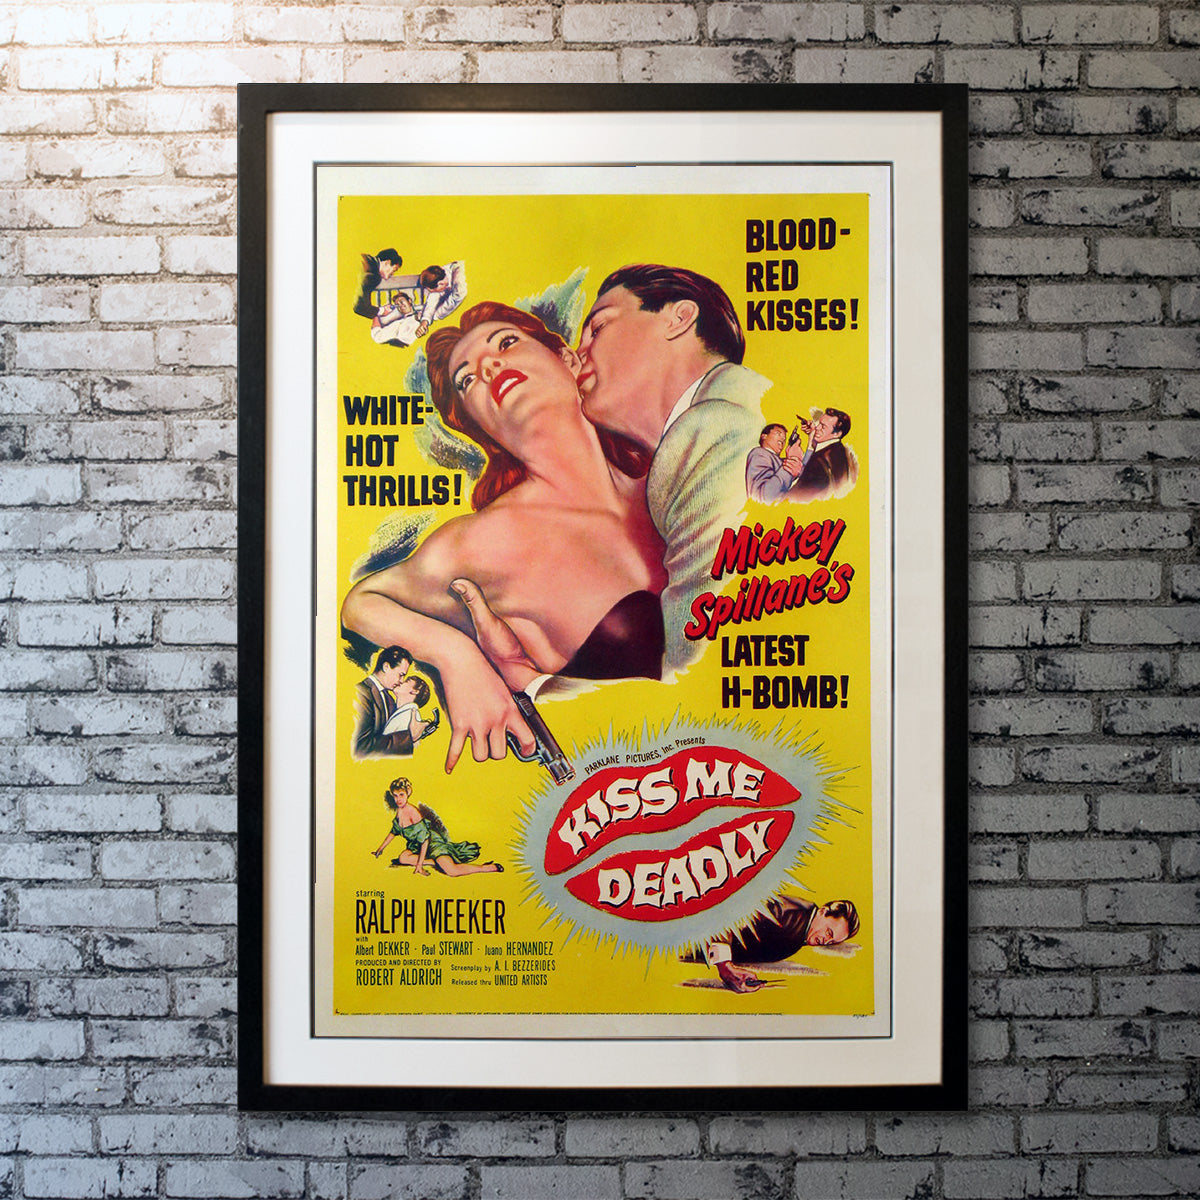 Original Movie Poster of Kiss Me Deadly (1955)